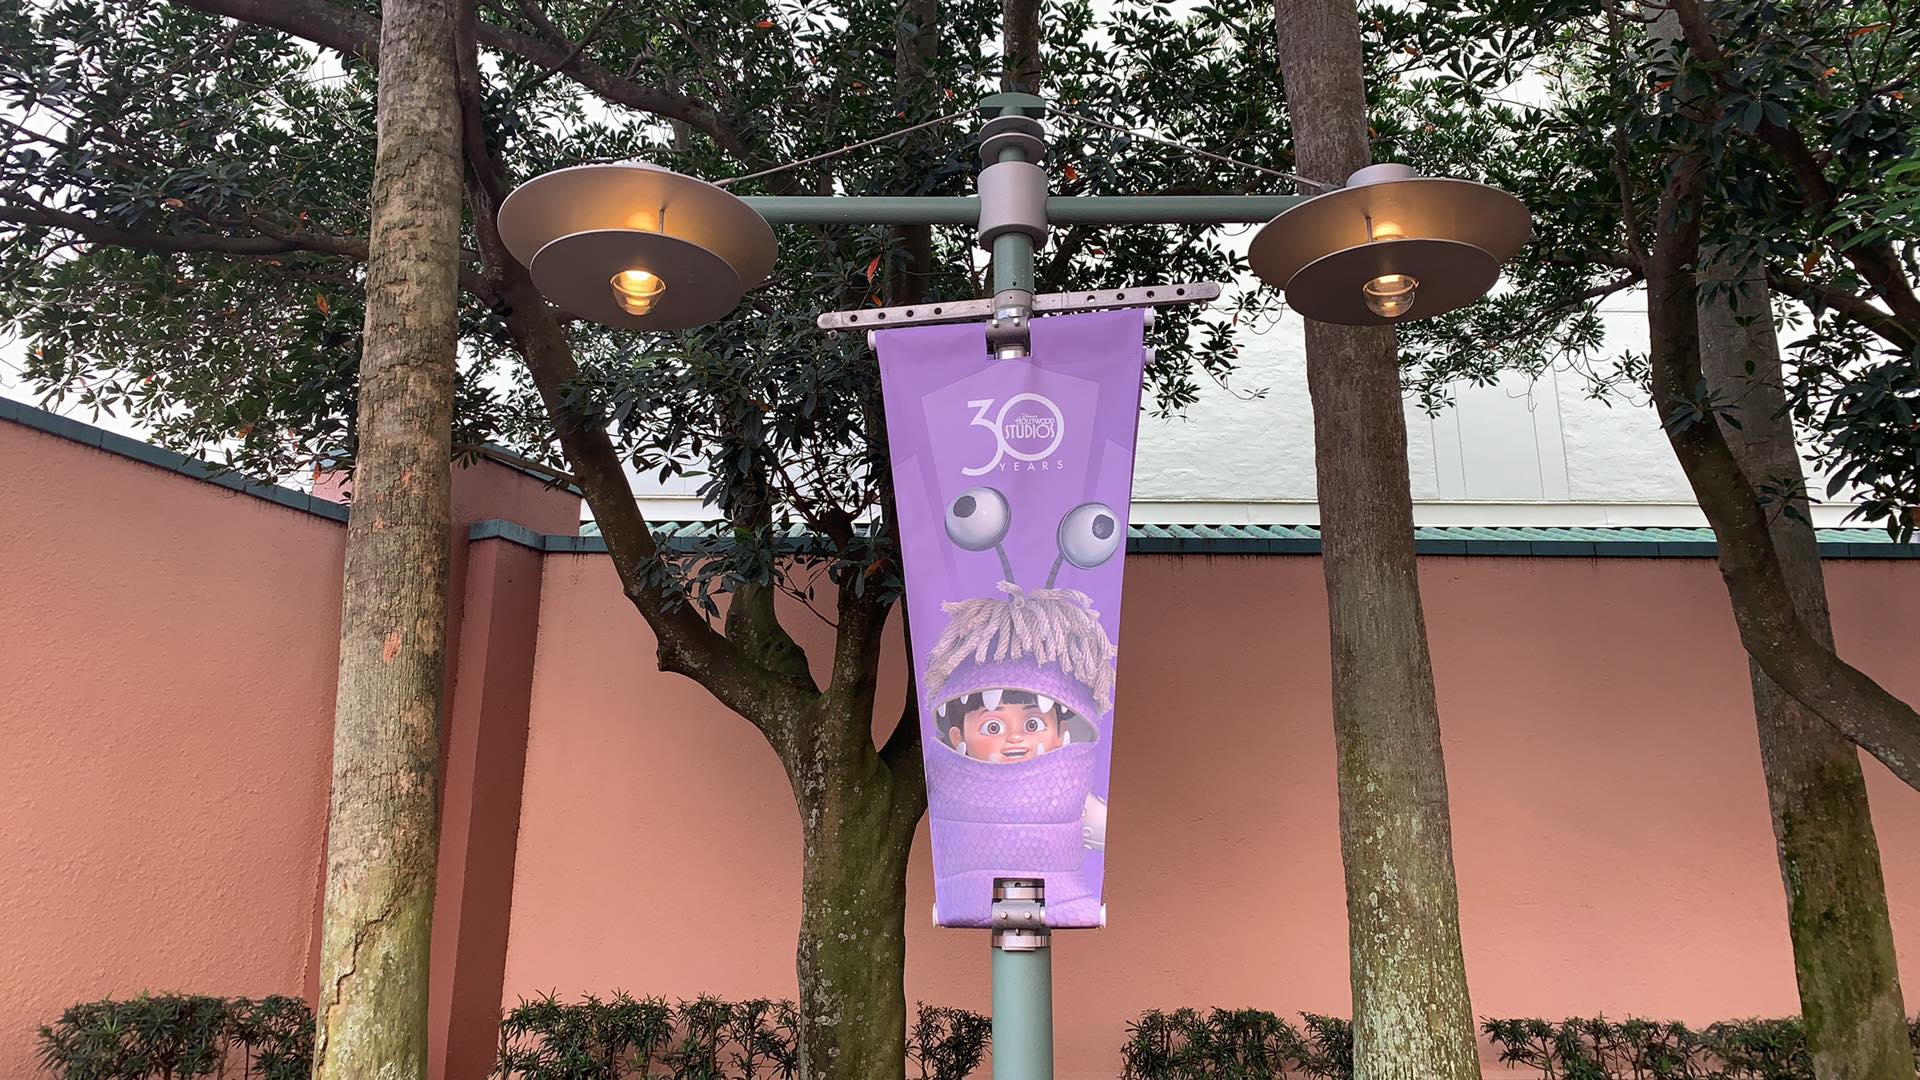 New 30th Anniversary Banners Are Up At Hollywood Studios